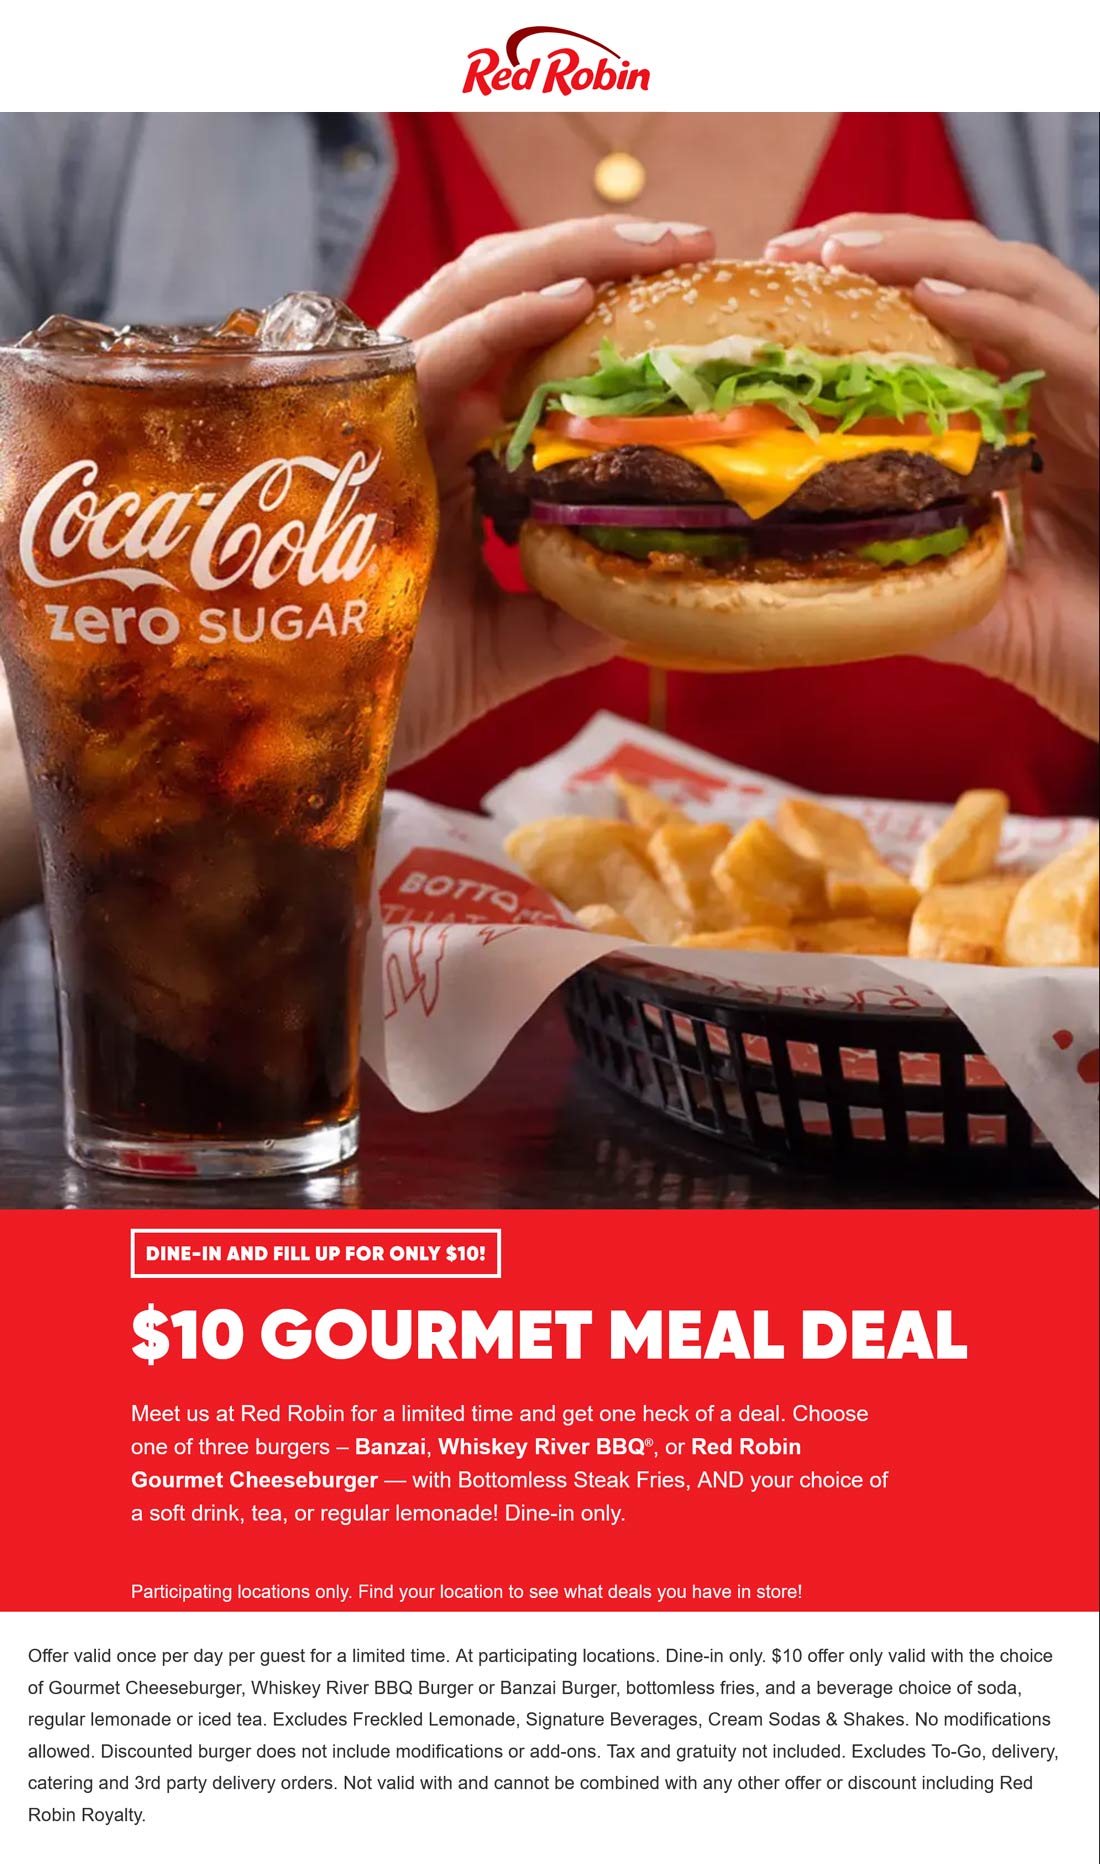 Red Robin coupons & promo code for [November 2022]